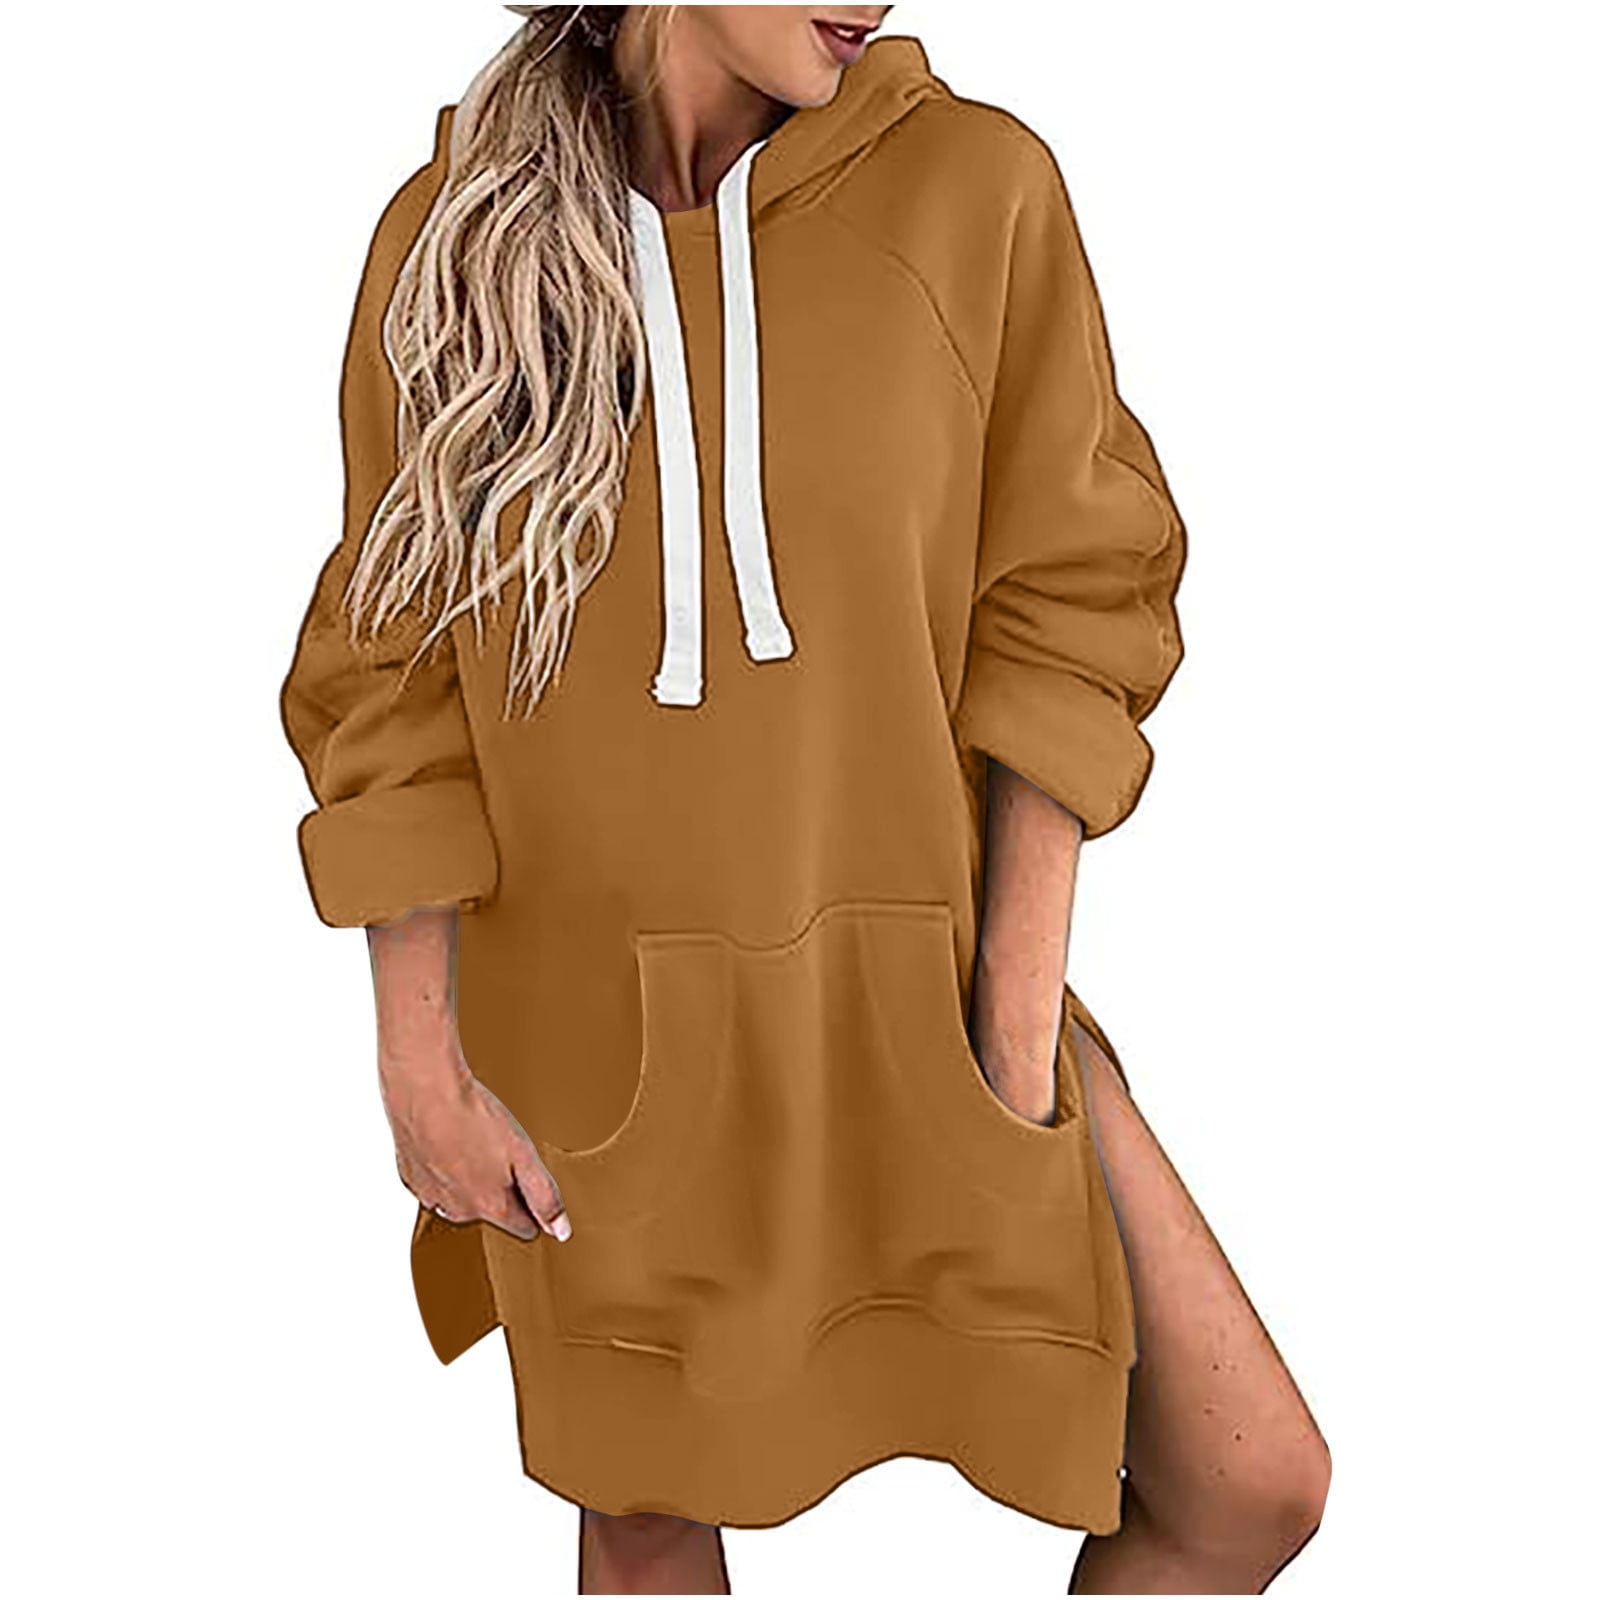 Oversized Hoodie Dress for Women with Slit Plain Pullover Drawstring Hooded  Sweatshirt Mini Dress with Pocket (Small, Yellow) 